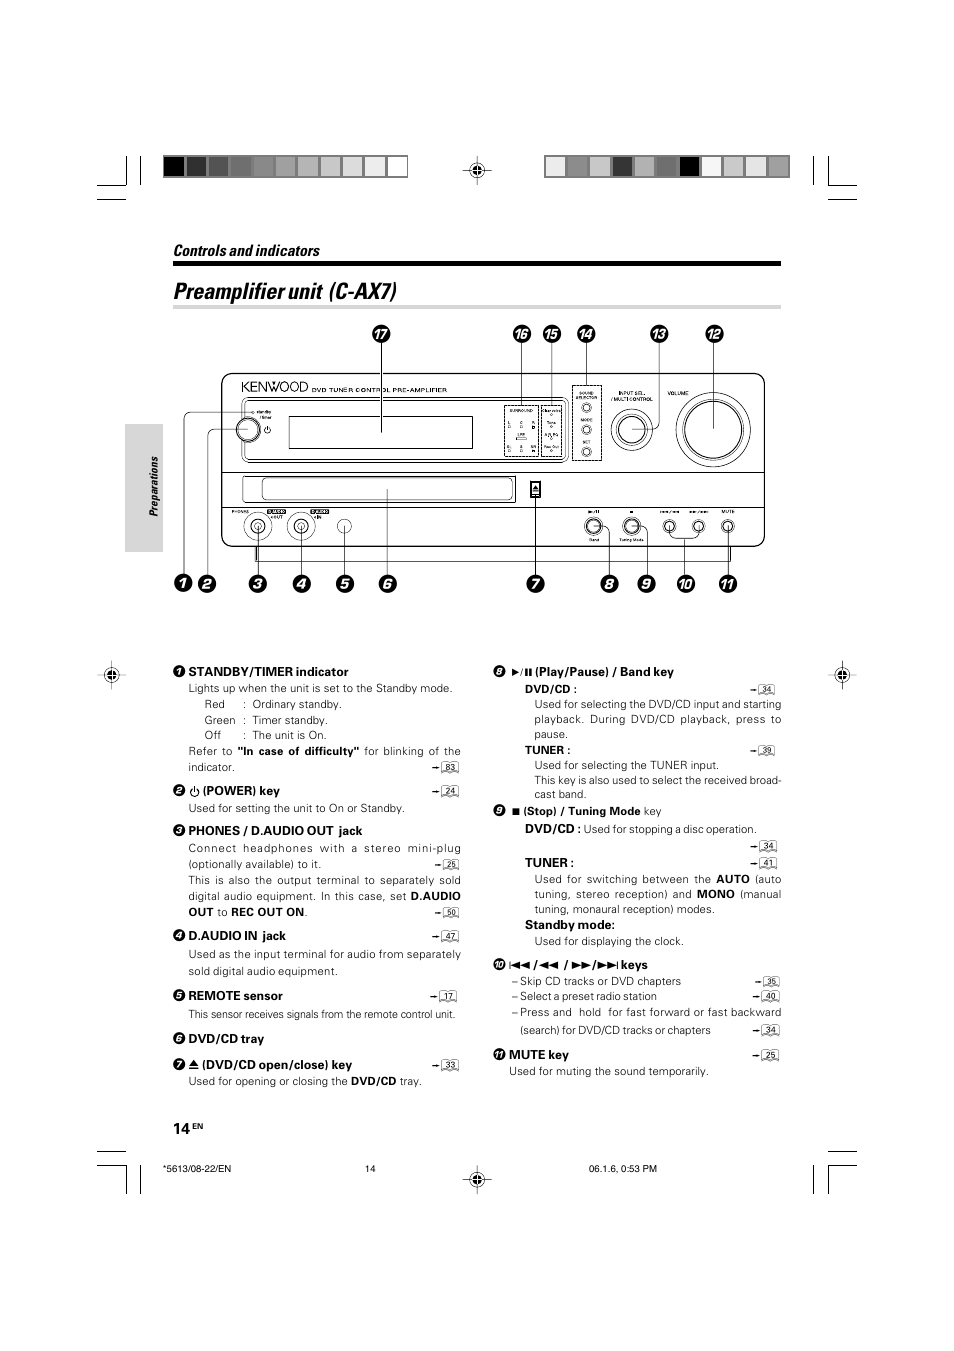 Preamplifier unit (c-ax7) | Kenwood AX-7 User Manual | Page 14 / 88 |  Original mode